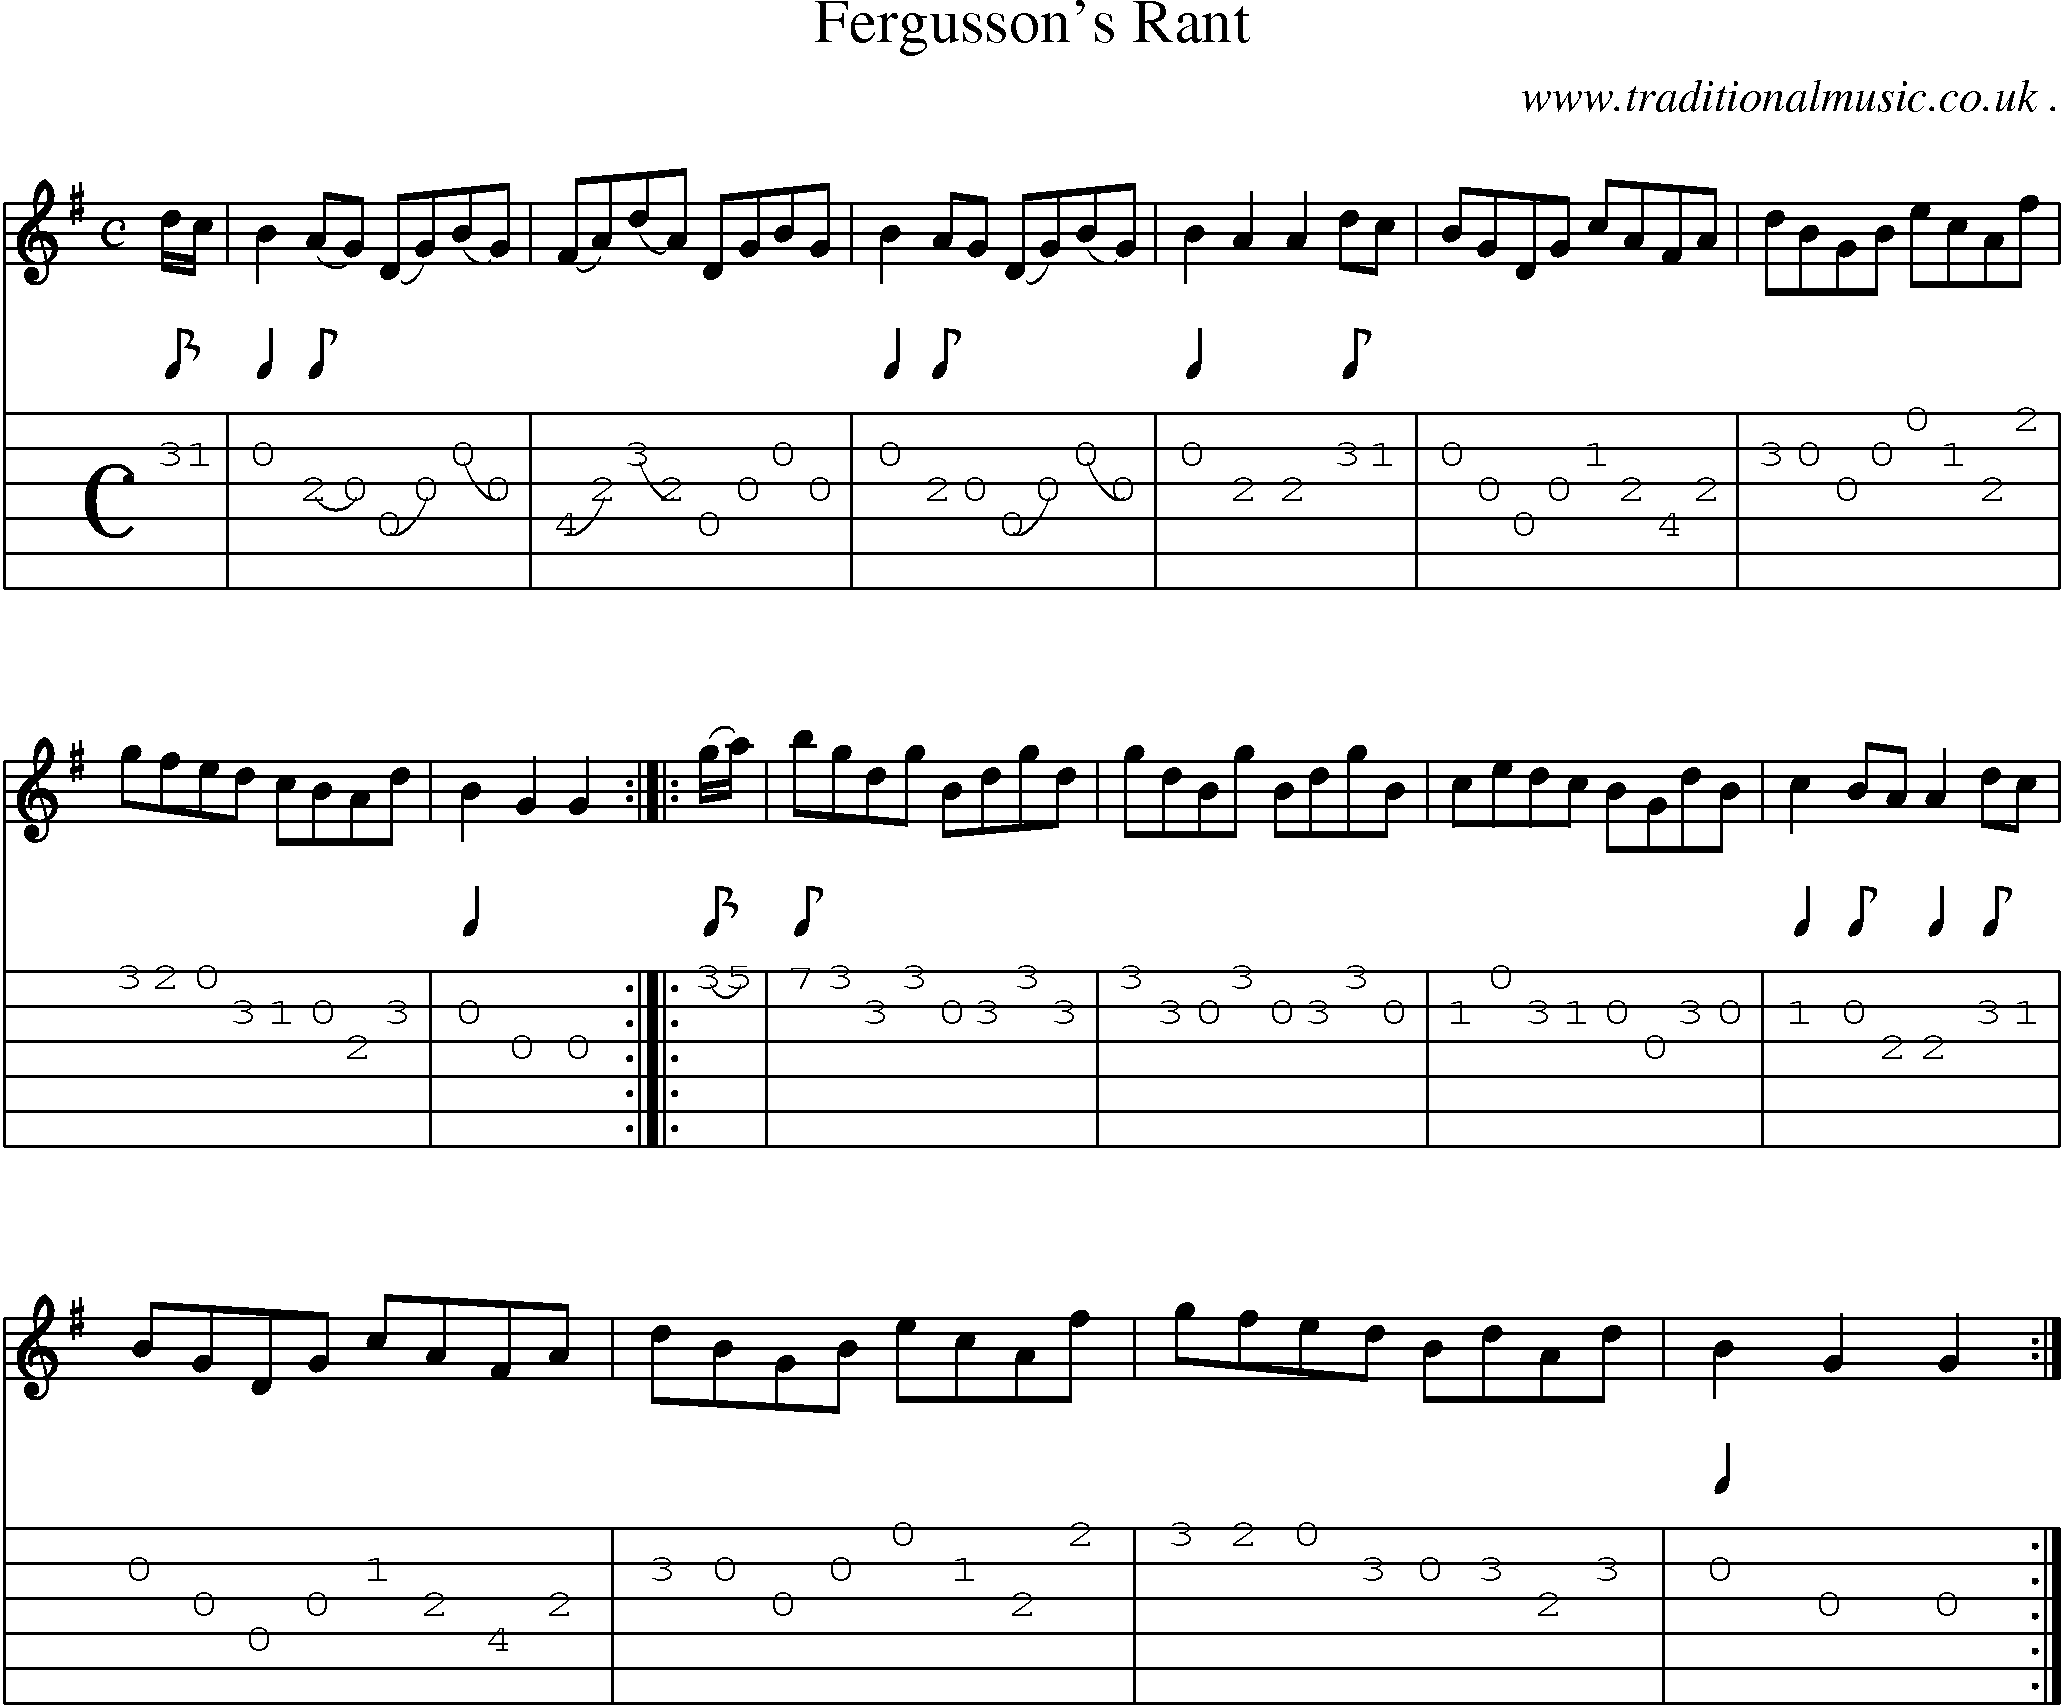 Sheet-Music and Guitar Tabs for Fergussons Rant